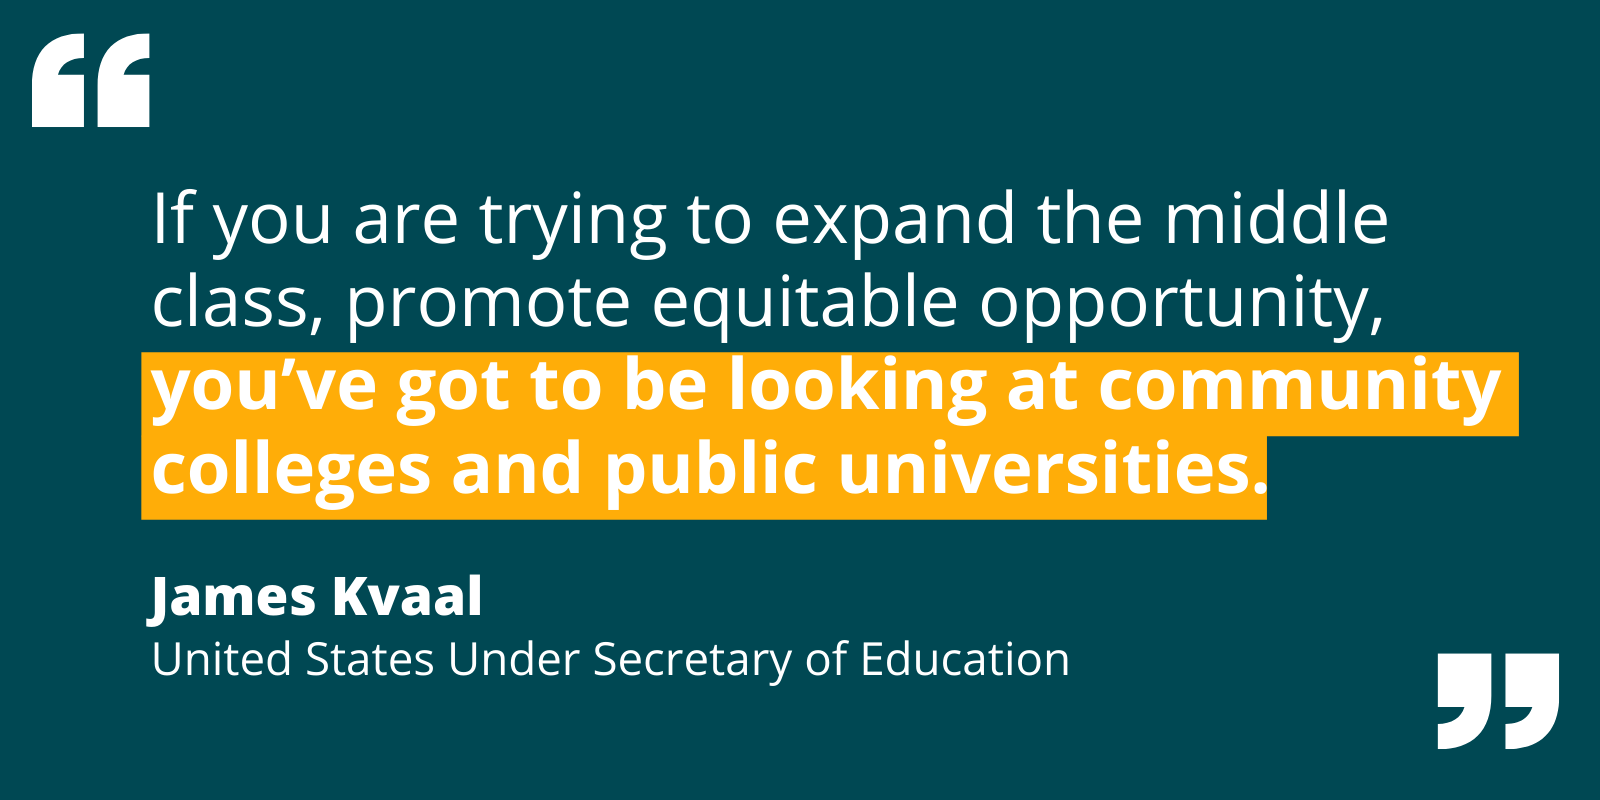 Quote from James Kvaal re: the value of community colleges and public universities for promoting equitable opportunity.